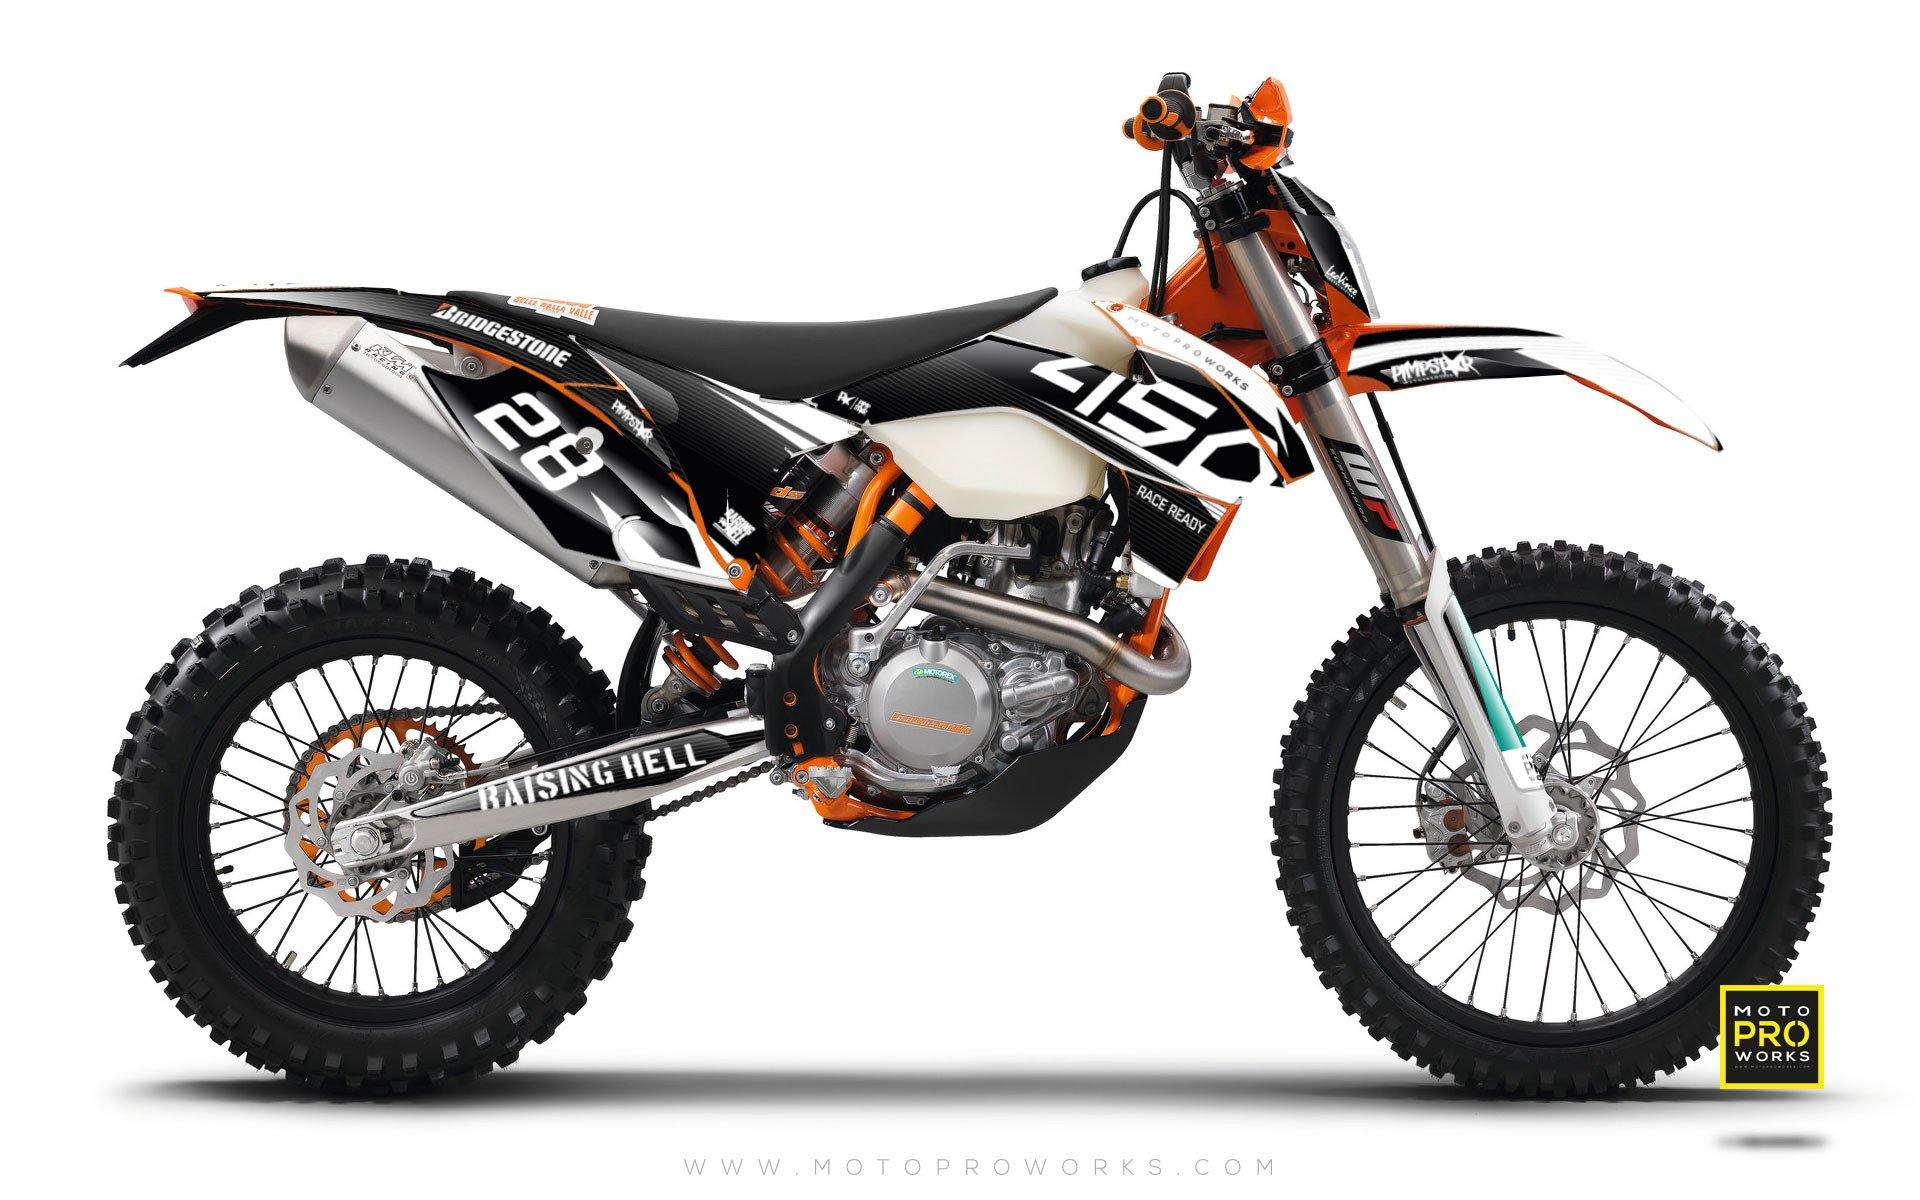 KTM GRAPHIC KIT - "BACMONO" - MotoProWorks | Decals and Bike Graphic kit